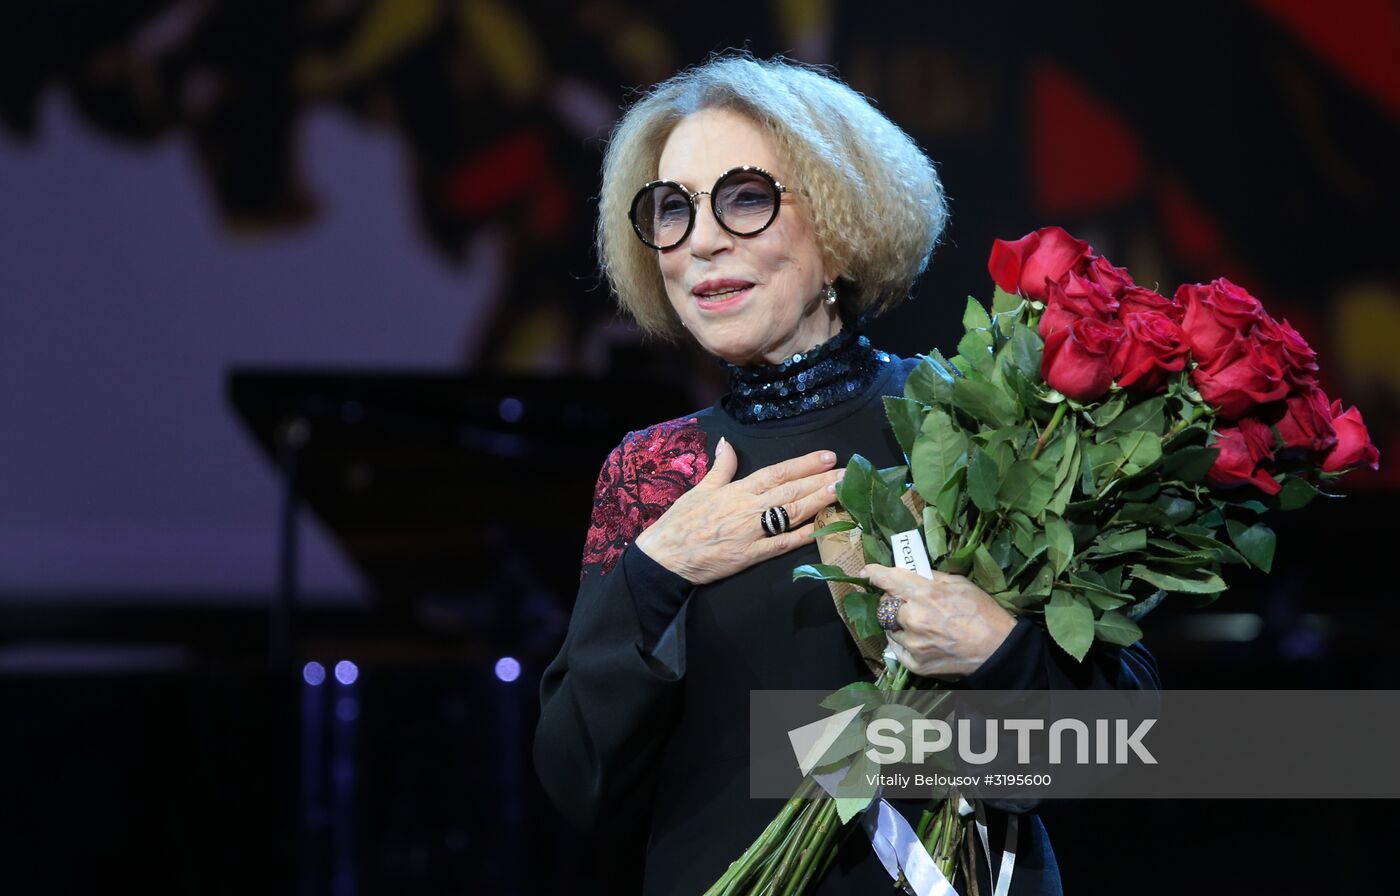 The 26th Crystal Turandot theatrical prize awards ceremony